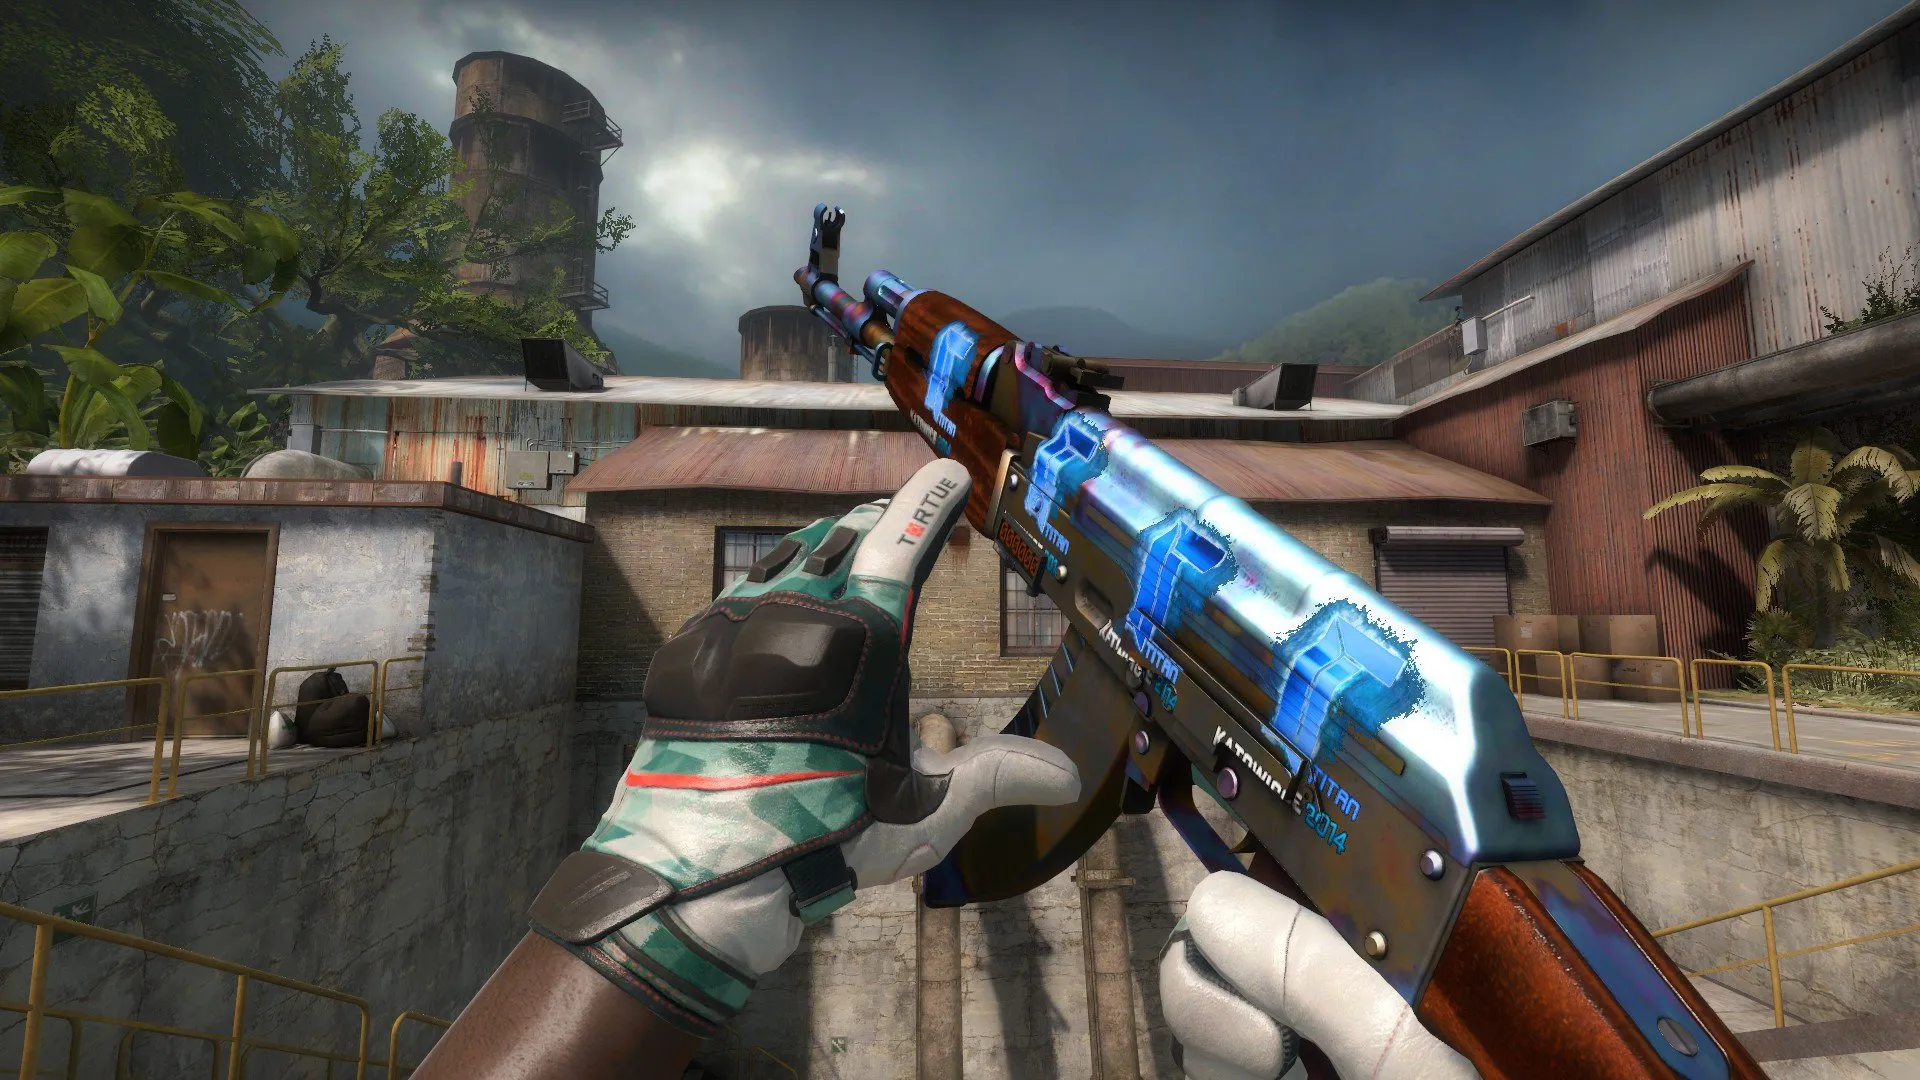 Devise Donau Tage af AK-47 CSGO Skin & Knife Sell for $500,000 - The Esports Today